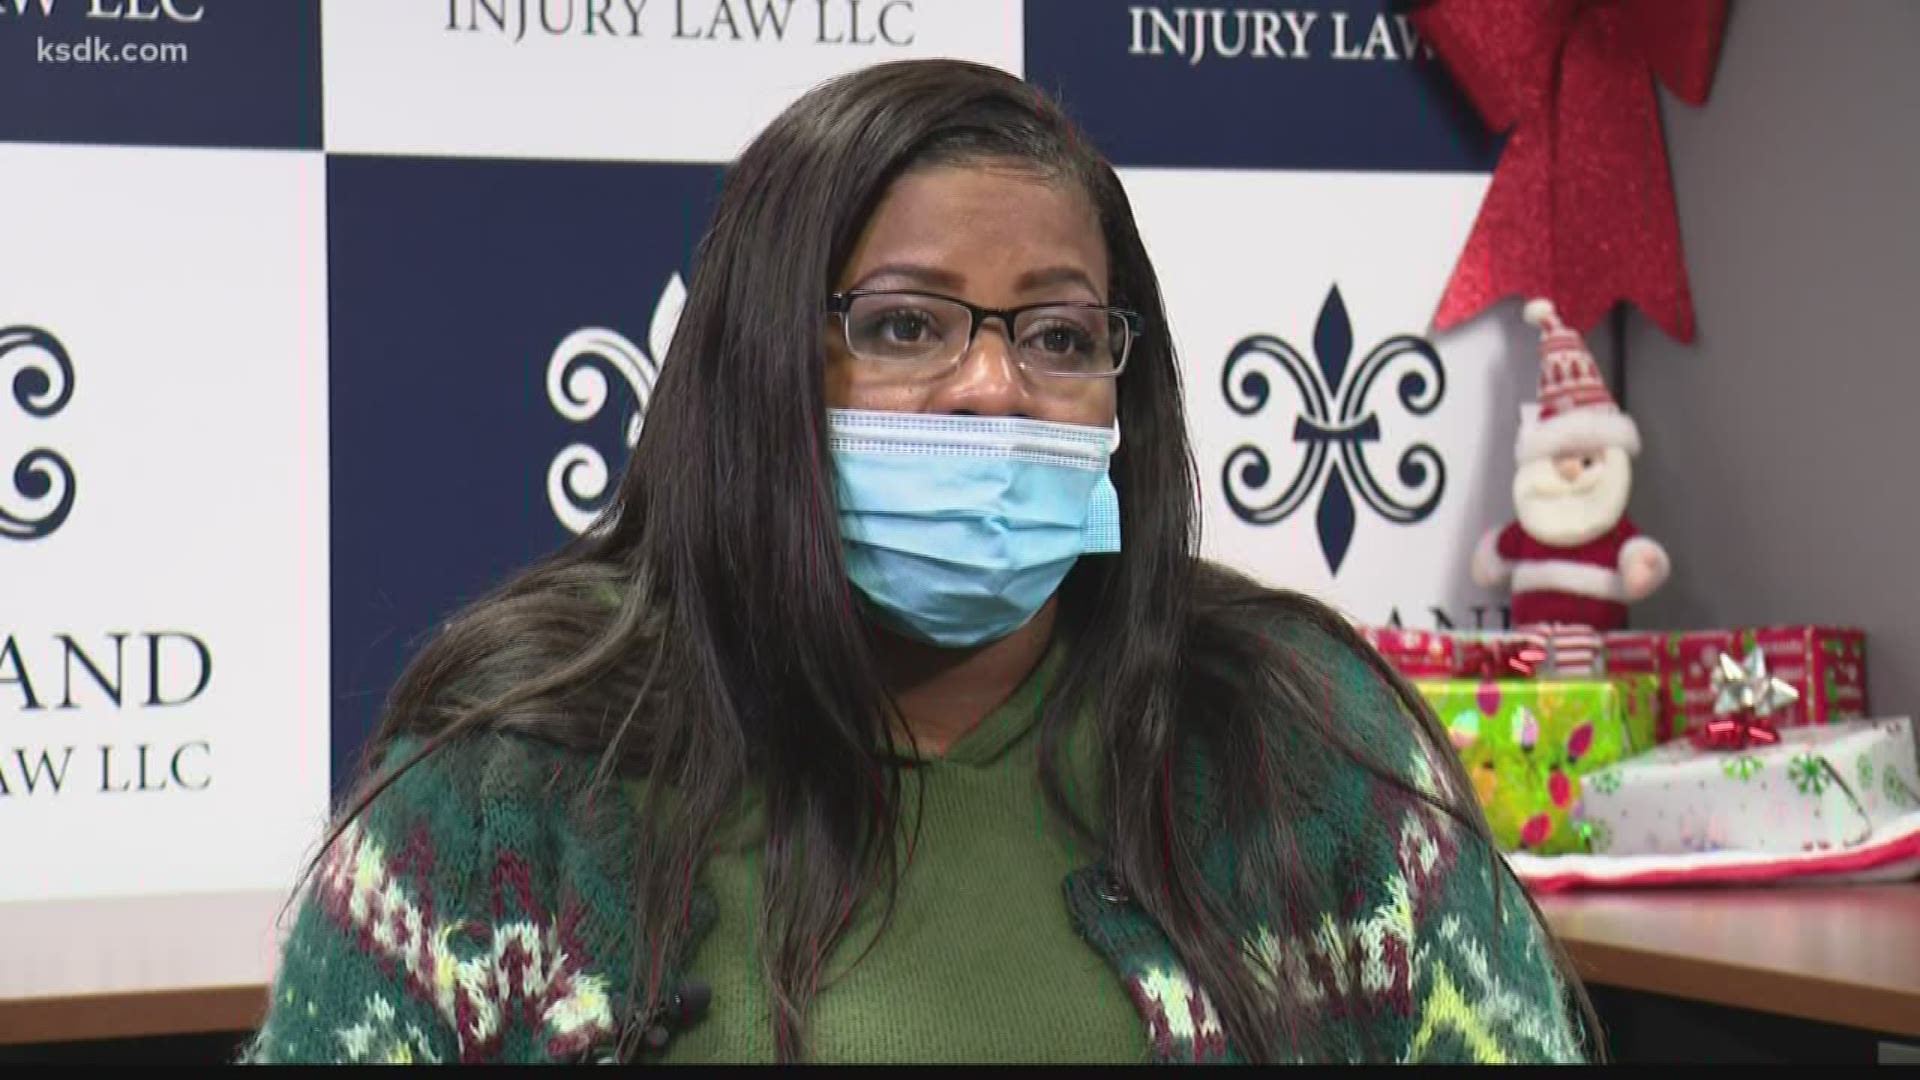 Ashley Hall, wearing a mask to protect her weakened immune system, said she forgives that officer — but it’s still hard to talk about what happened that day.